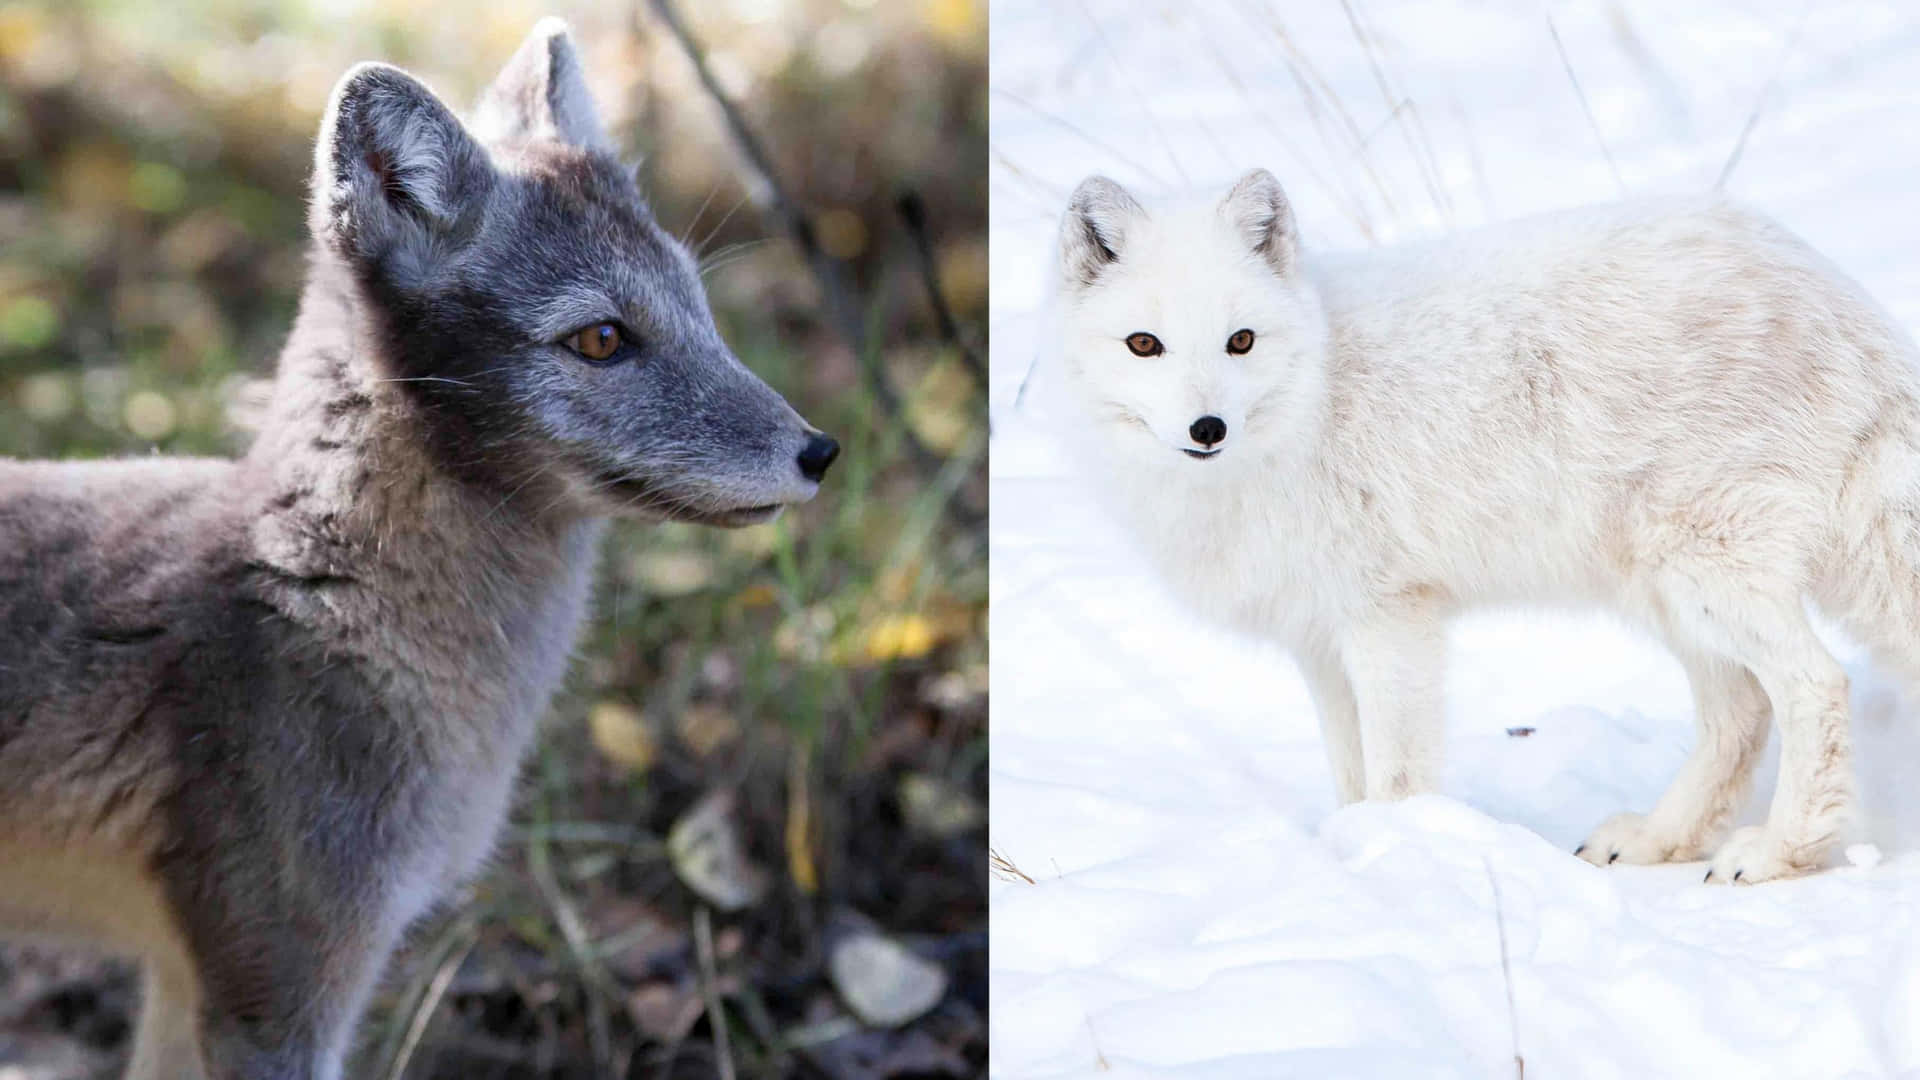 The Arctic Fox lives in the icy and frosty climate of the Arctic.